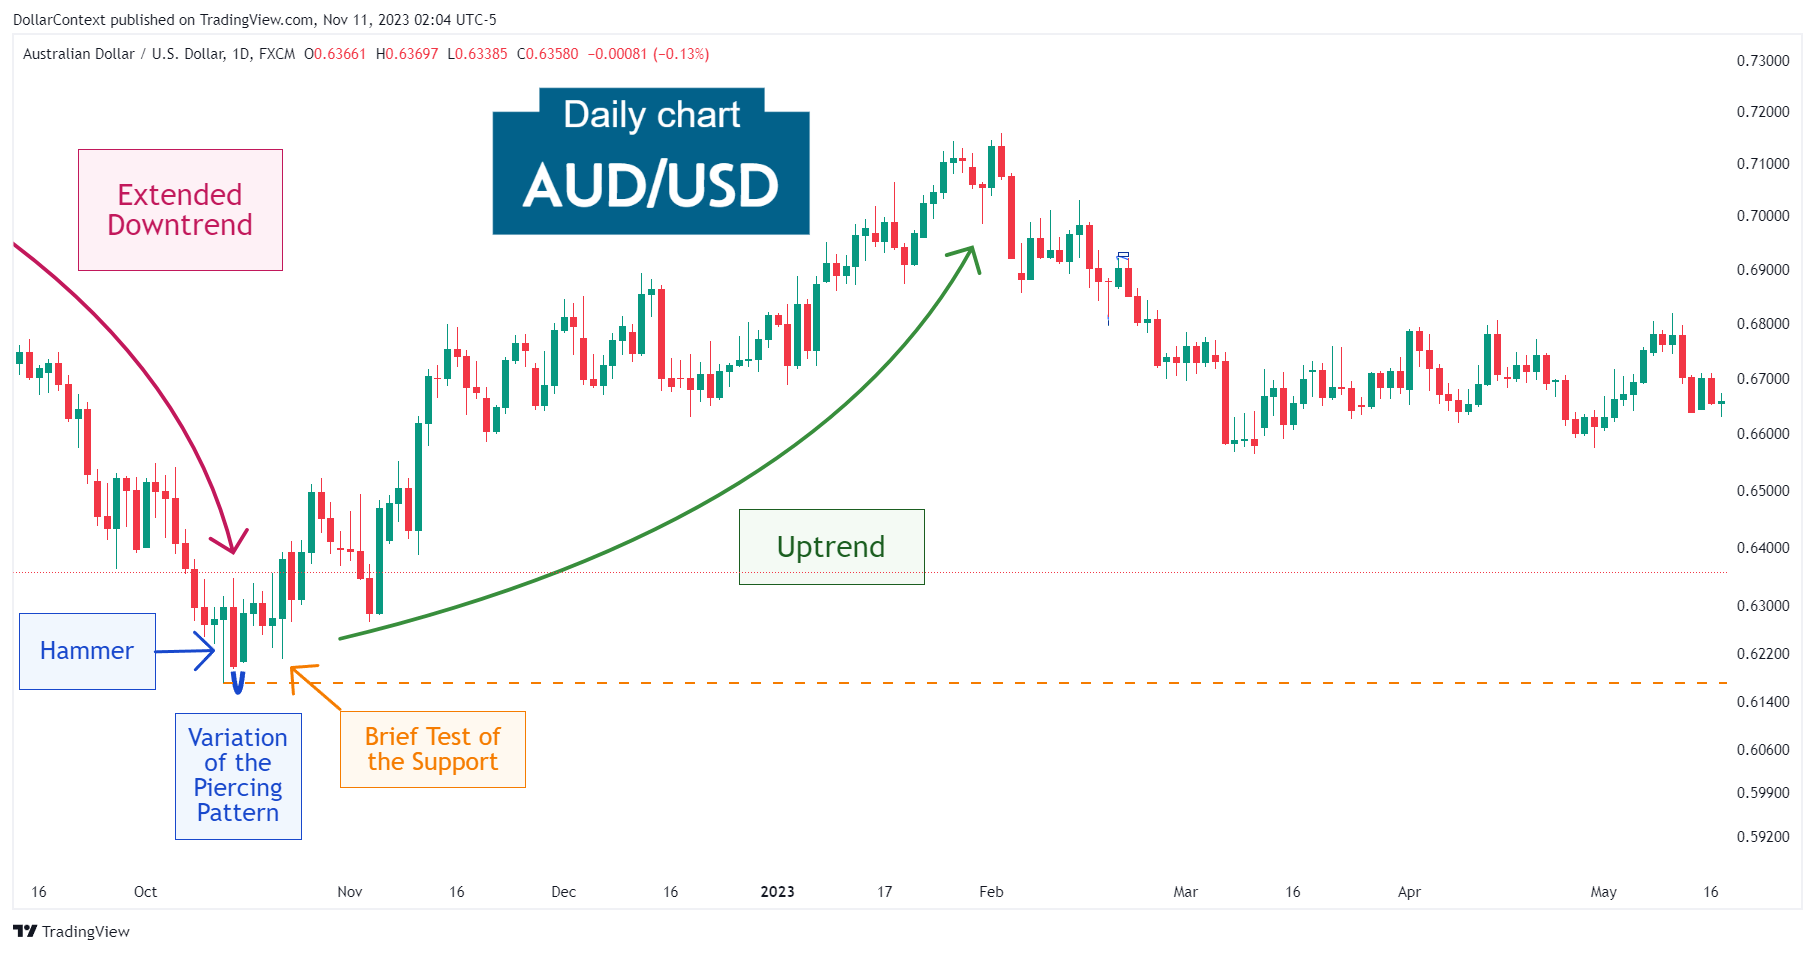 AUD/USD: Rally After the Bottom in April 2022 (Daily Chart)